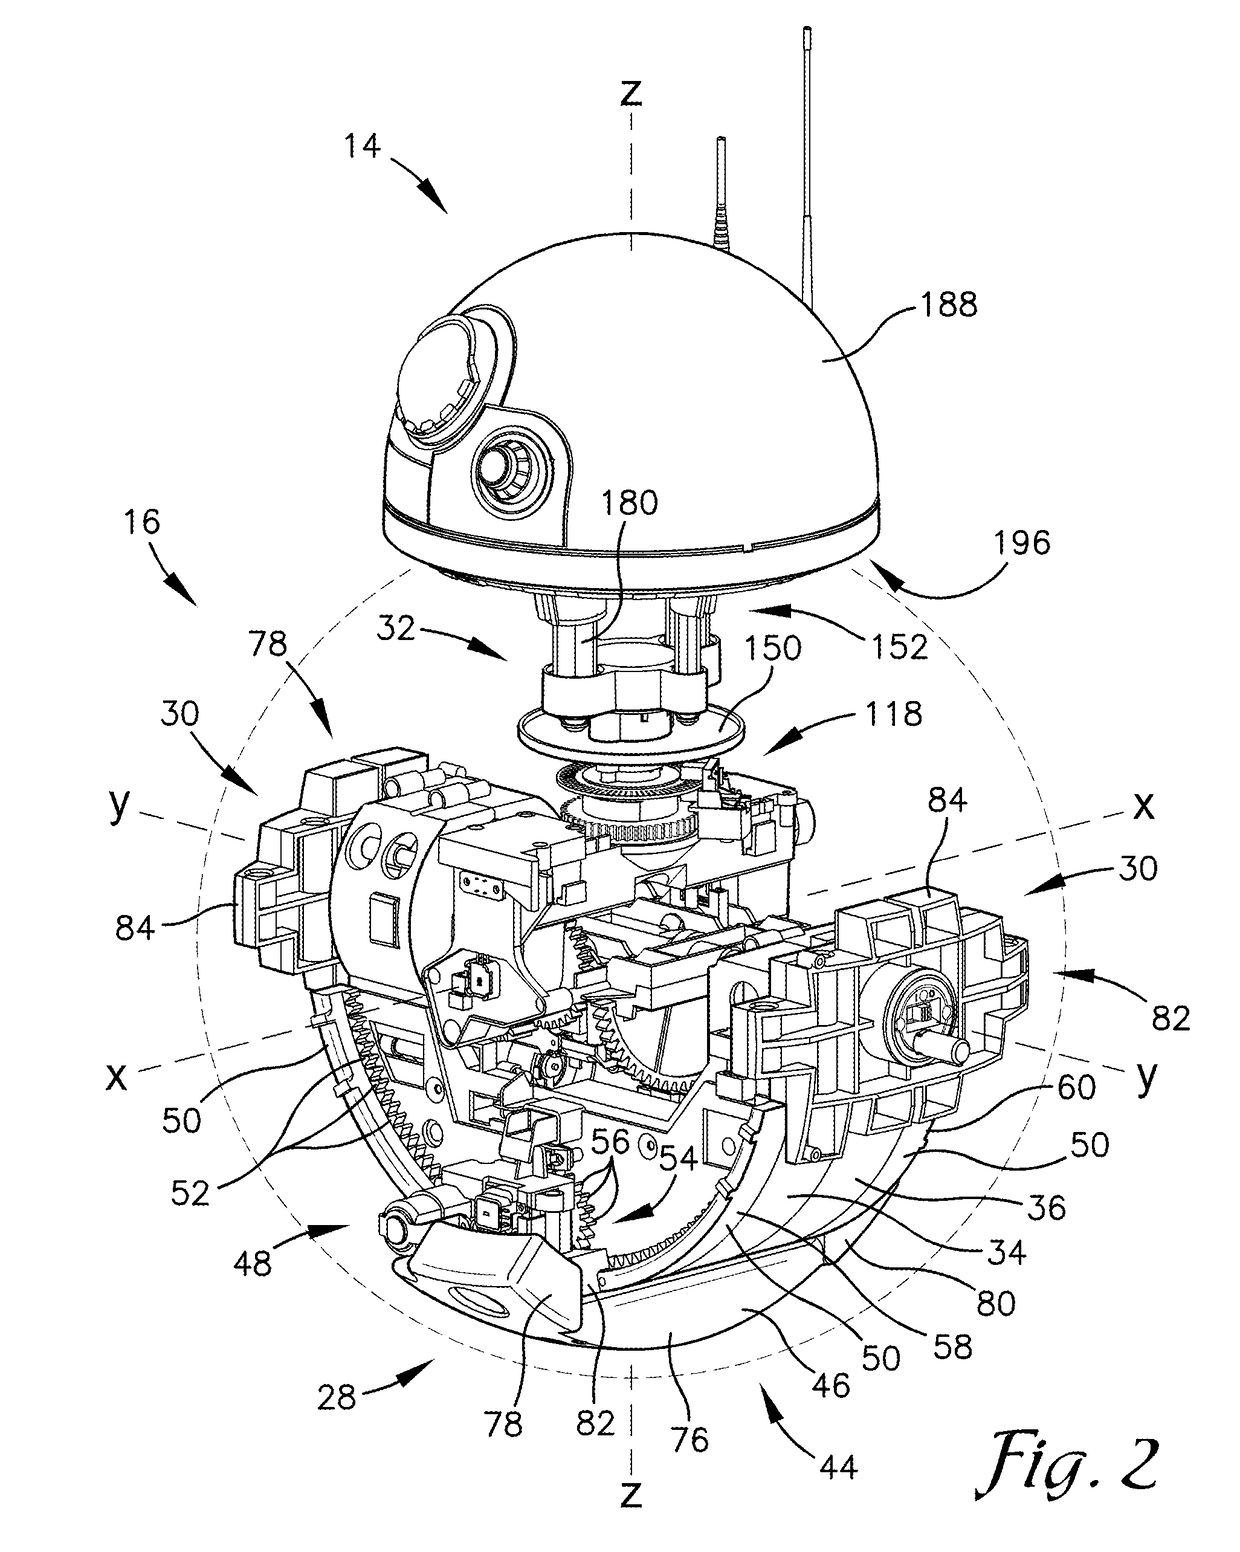 Spherical mobile robot with shifting weight steering